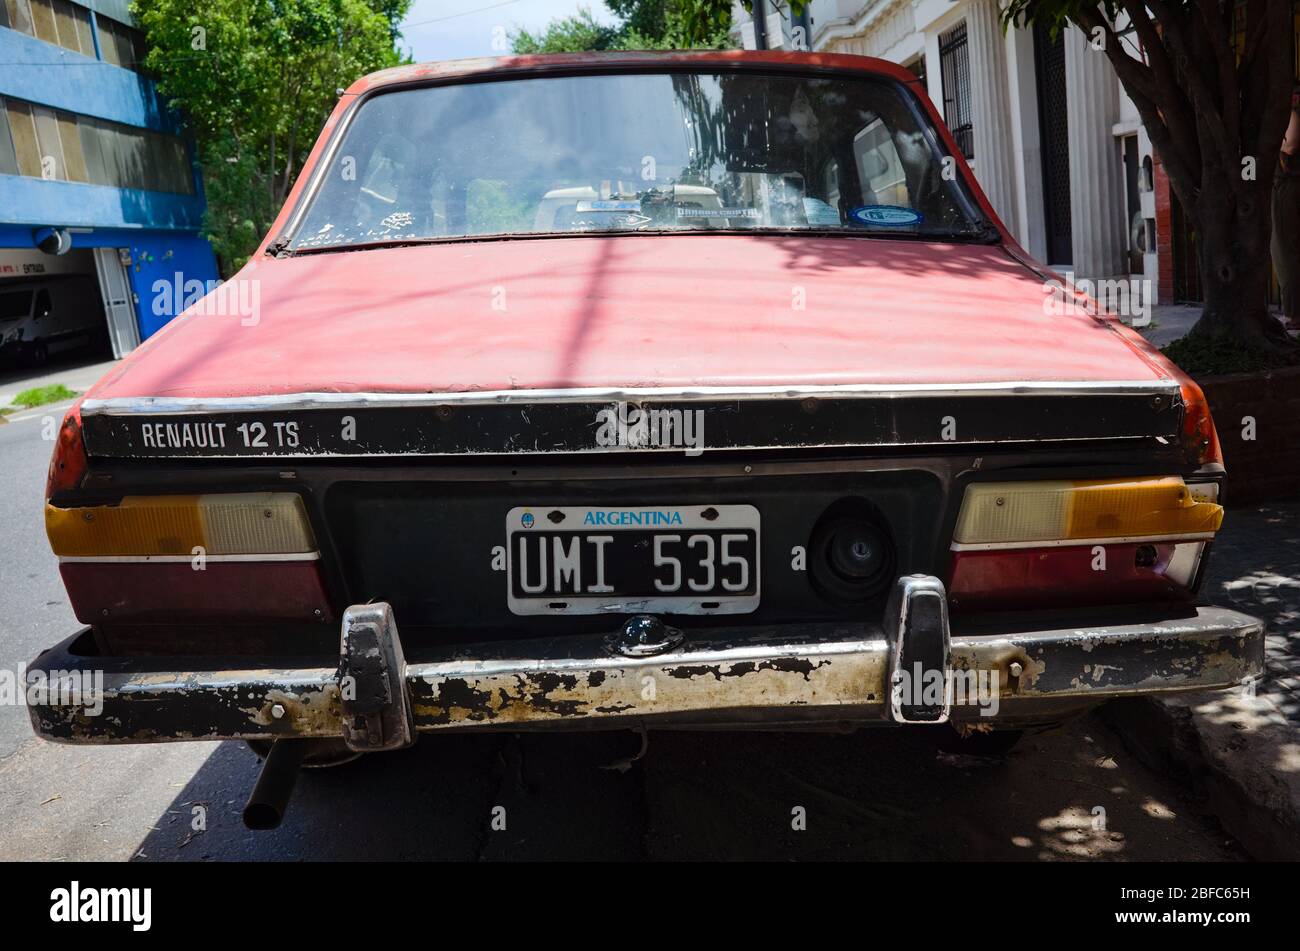 Buenos Aires, Argentina - January, 2020: Old Renault 12 TS car. Obsolete vintage car with Argentinian registration plate of Buenos Aires city. Stock Photo